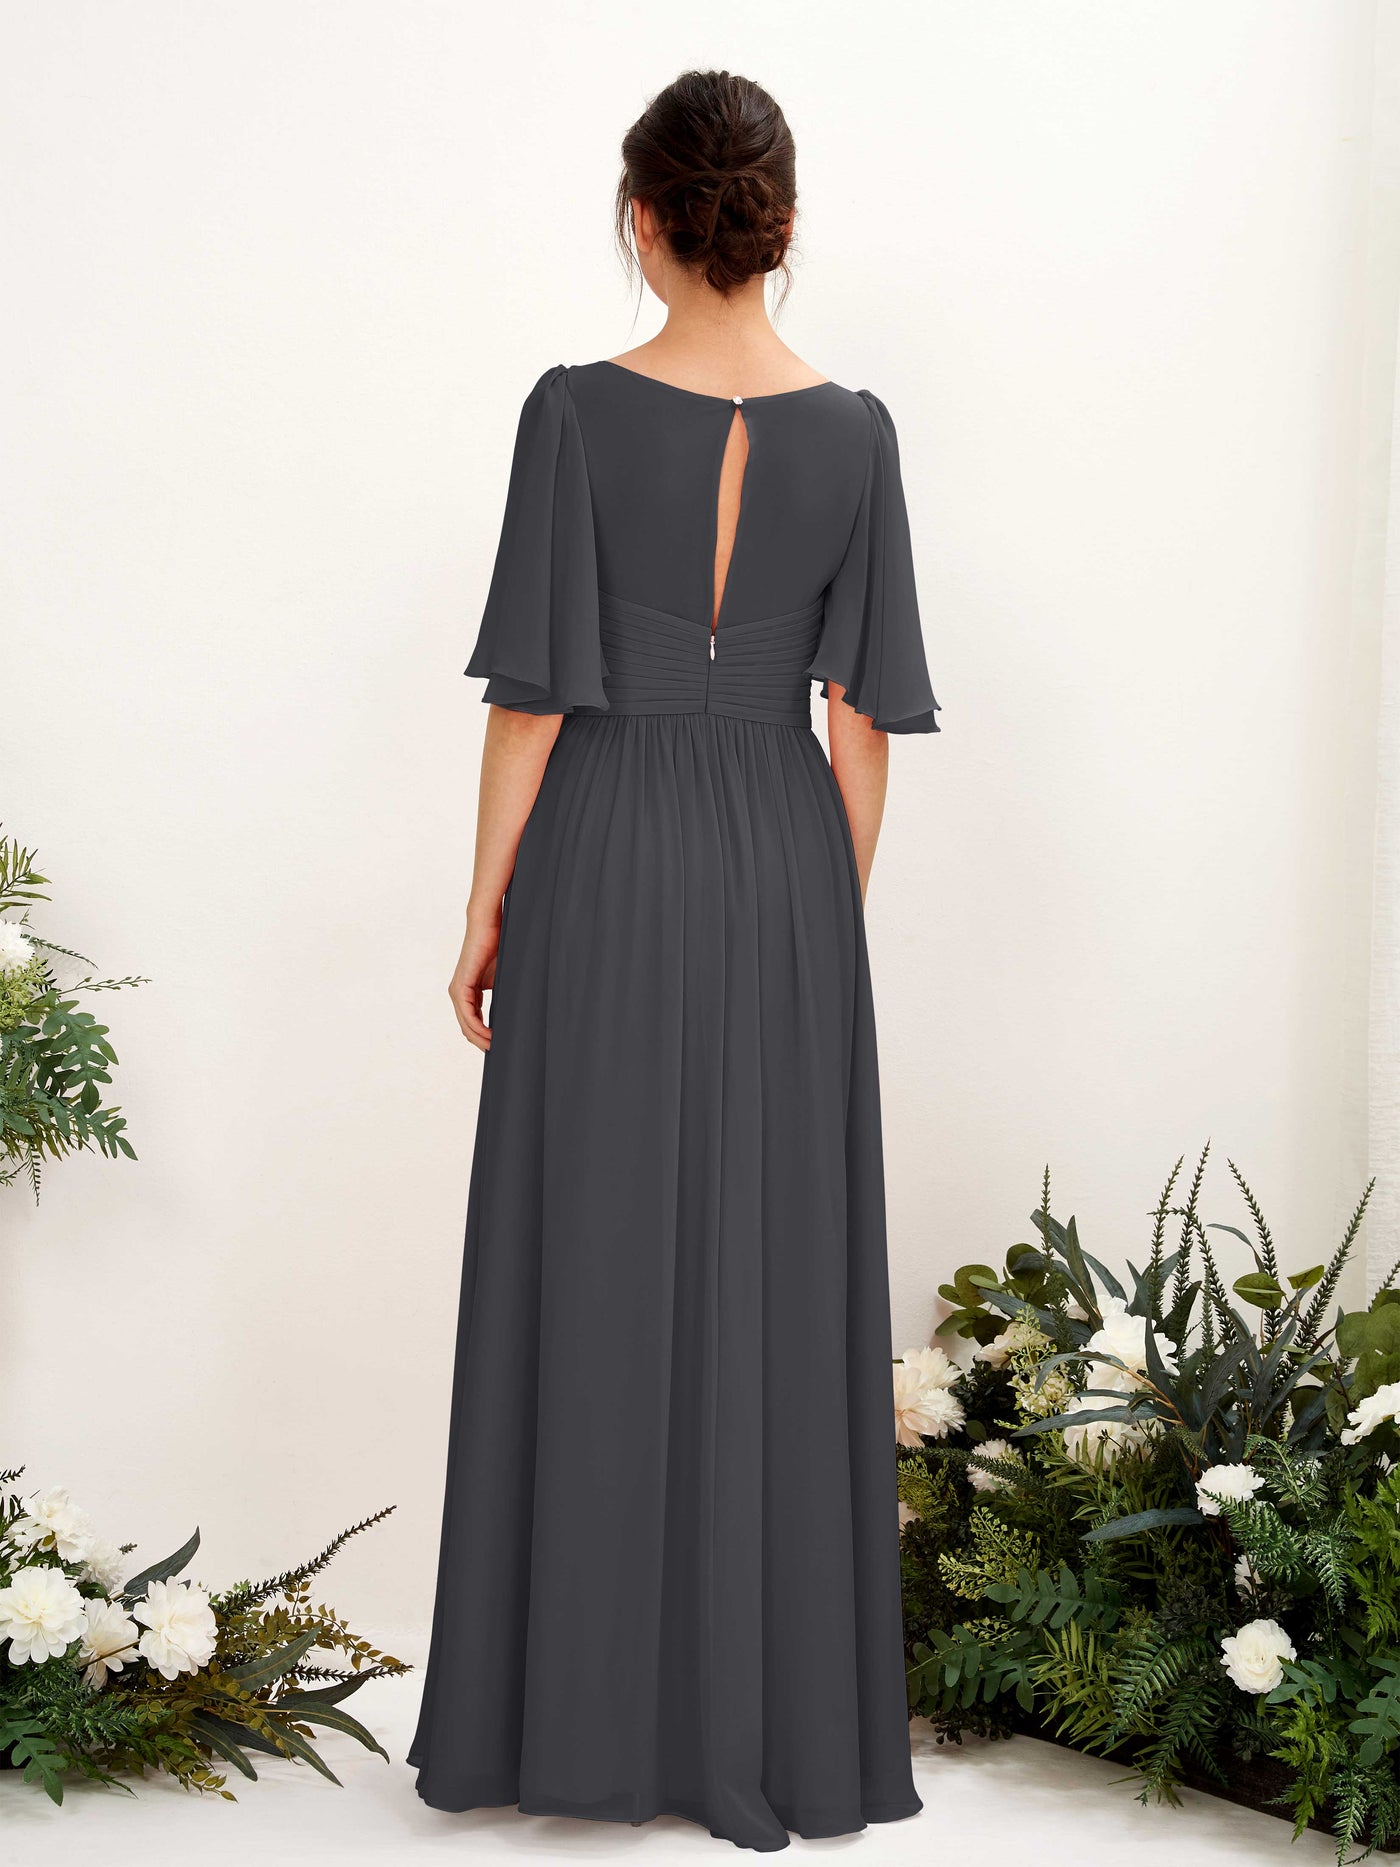 Pewter Bridesmaid Dresses Bridesmaid Dress A-line Chiffon V-neck Full Length 1/2 Sleeves Wedding Party Dress (81221638)#color_pewter